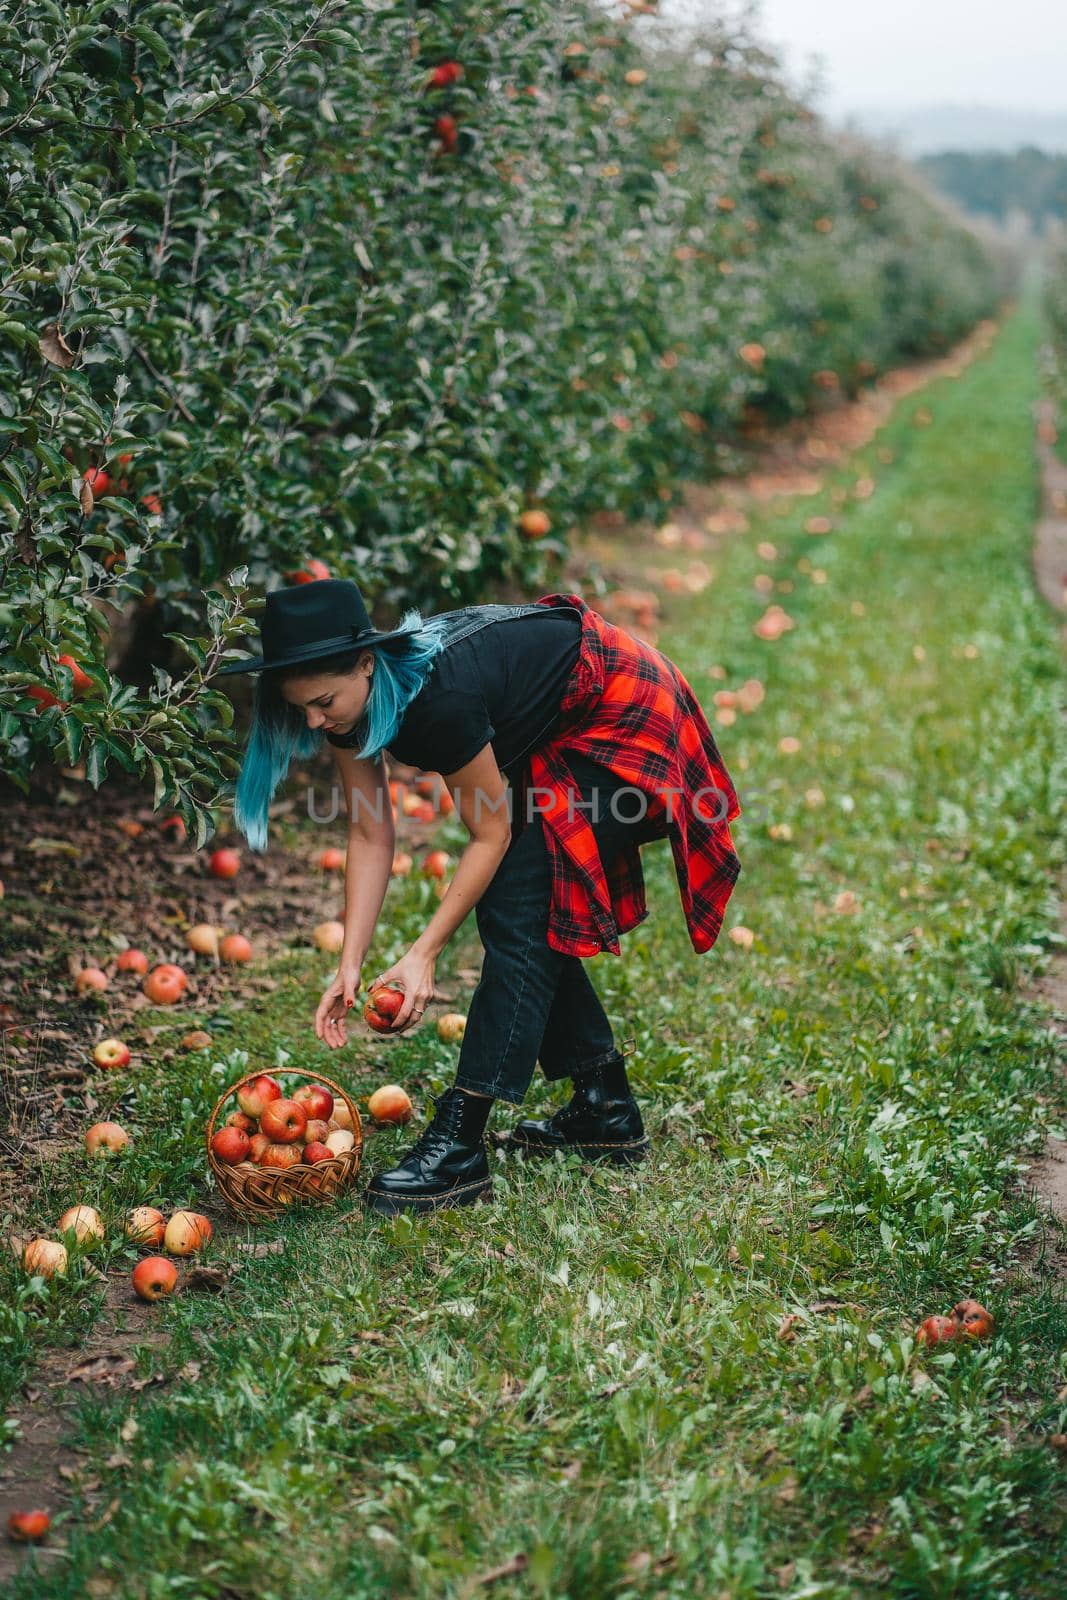 Blue haired woman picking up ripe red apple fruits in green garden. Organic lifestyle, agriculture, gardener occupation. High quality photo